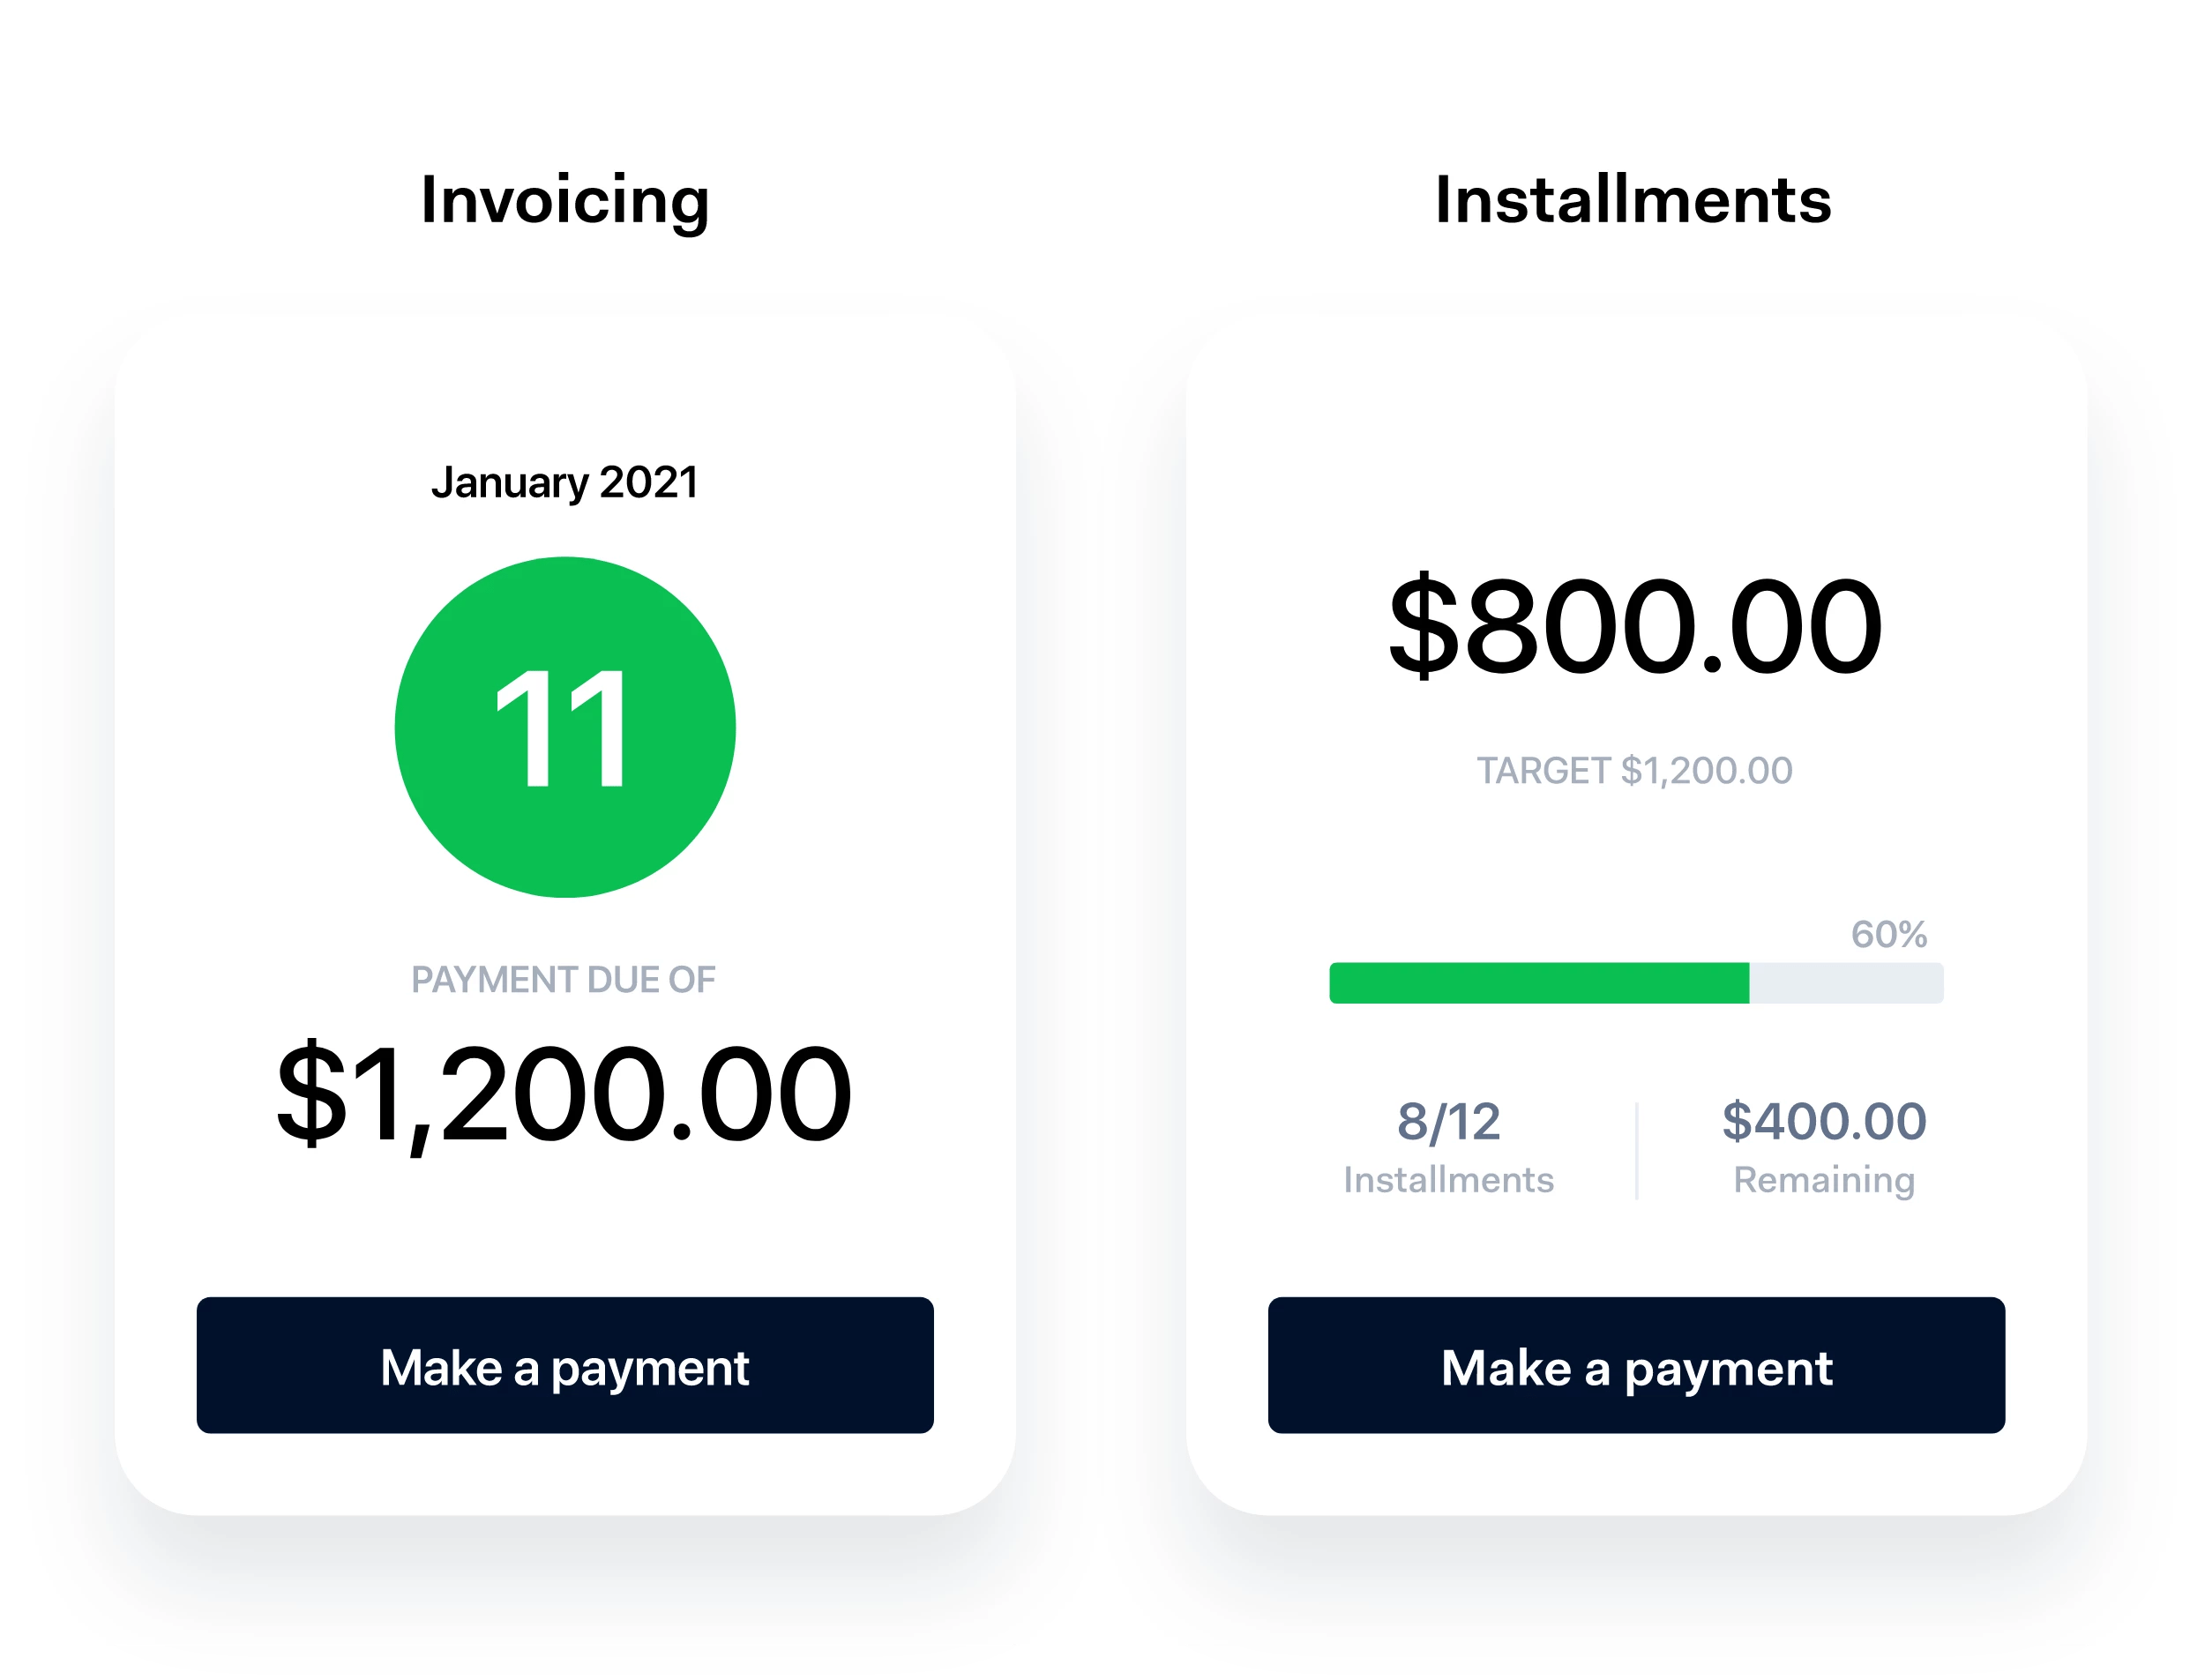 Screens for invoicing and instalments